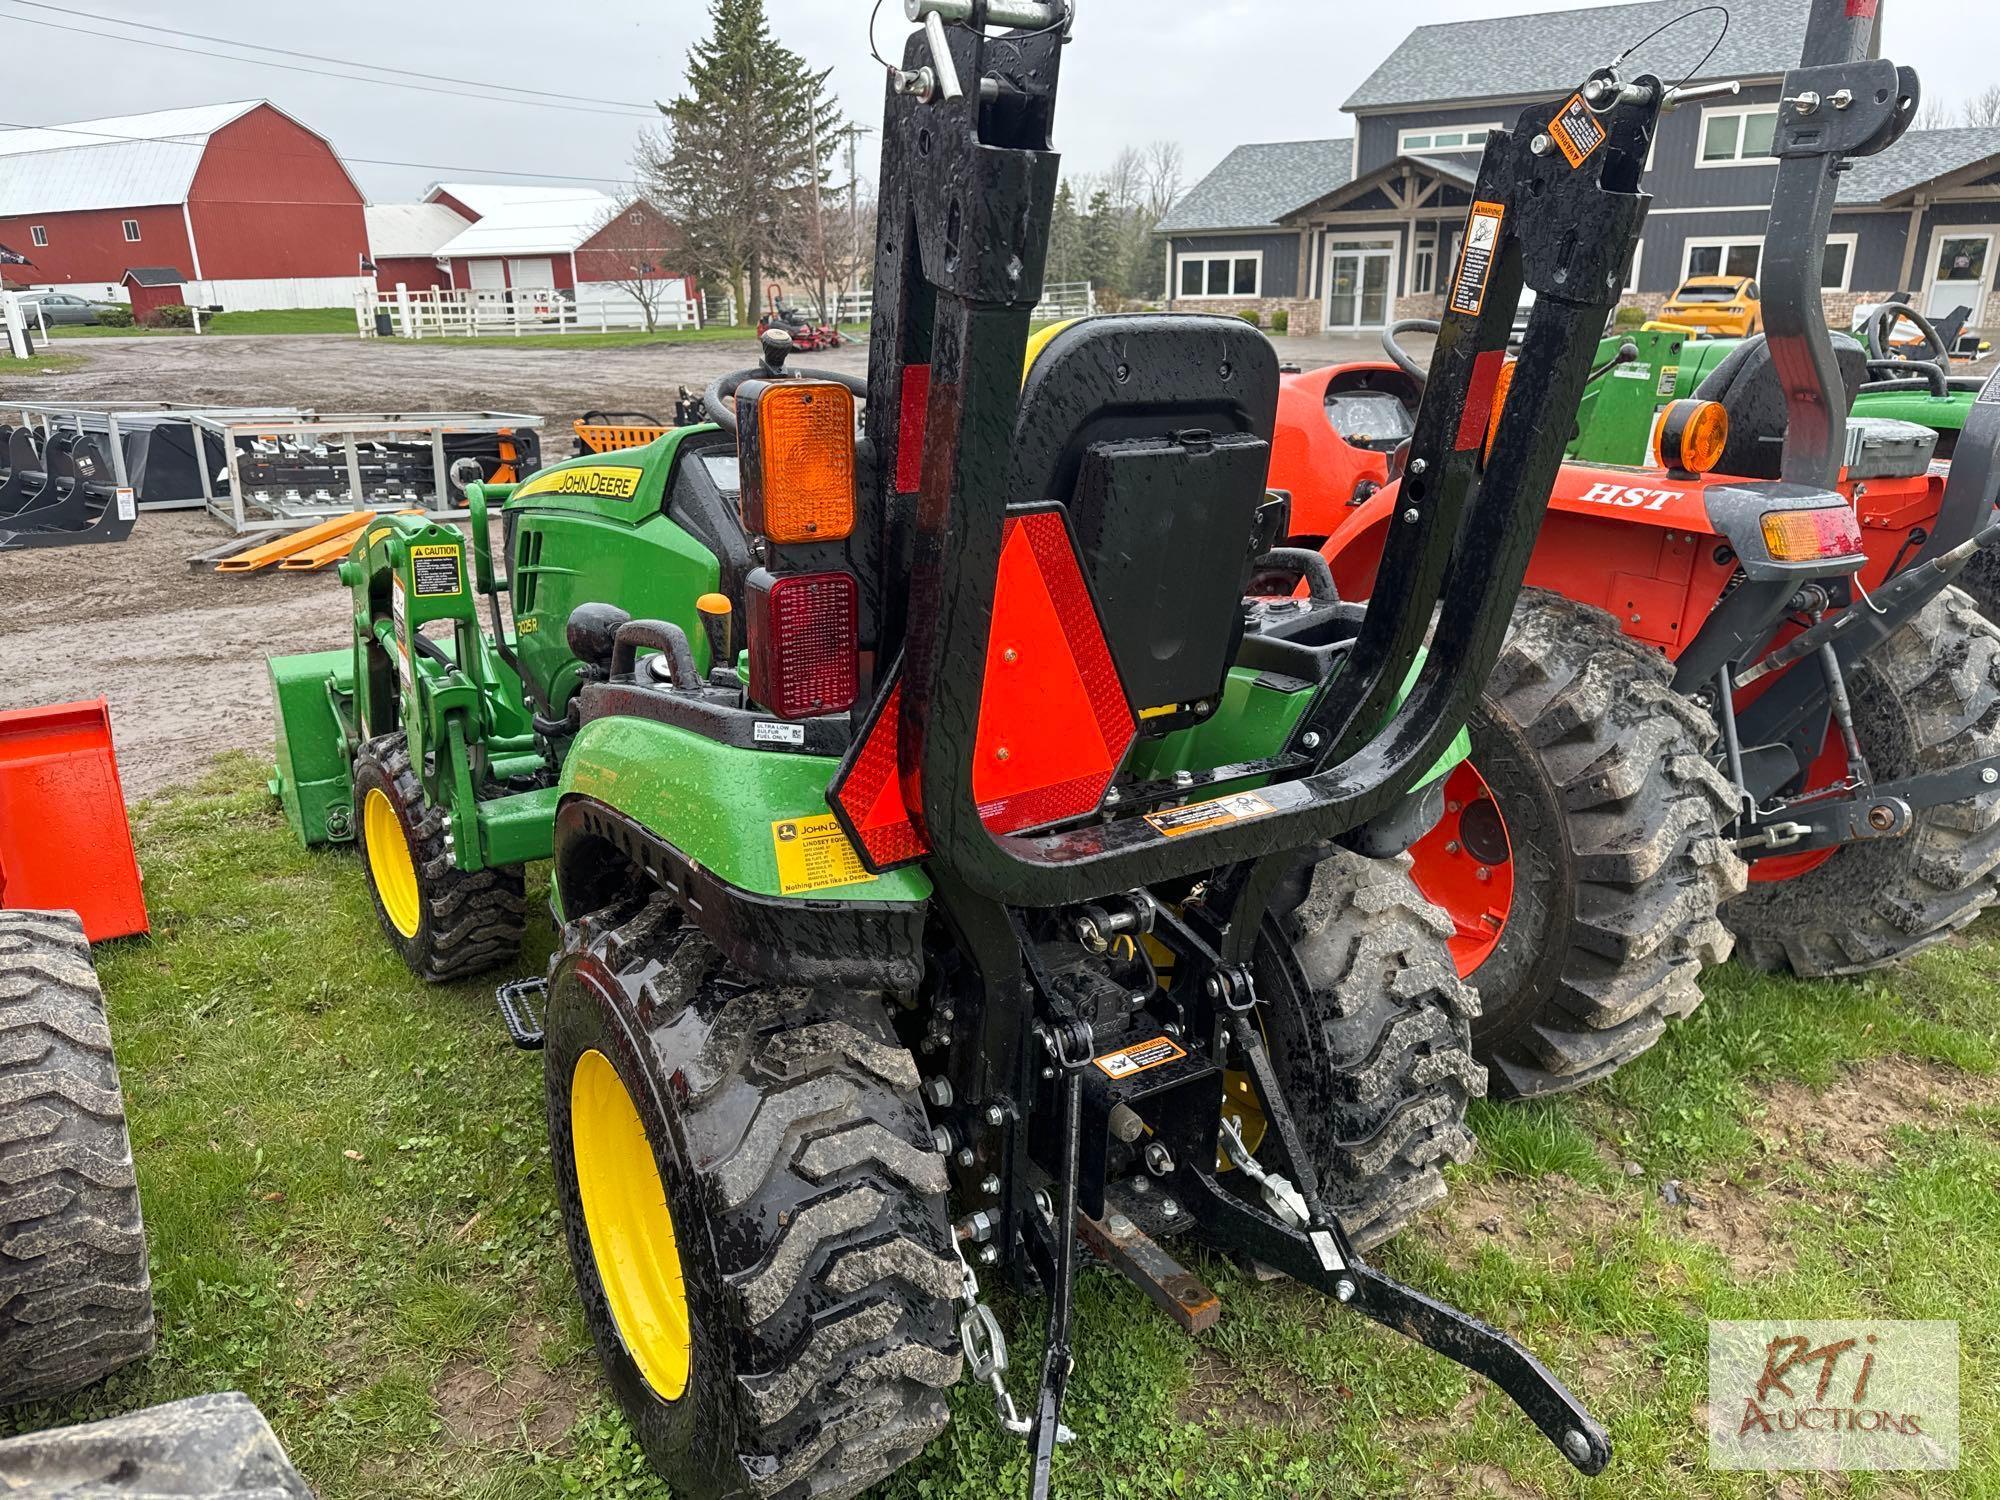 John Deere 2025R 4WD compact diesel tractor, with loader and quick attach bucket, 140hrs. Sells with